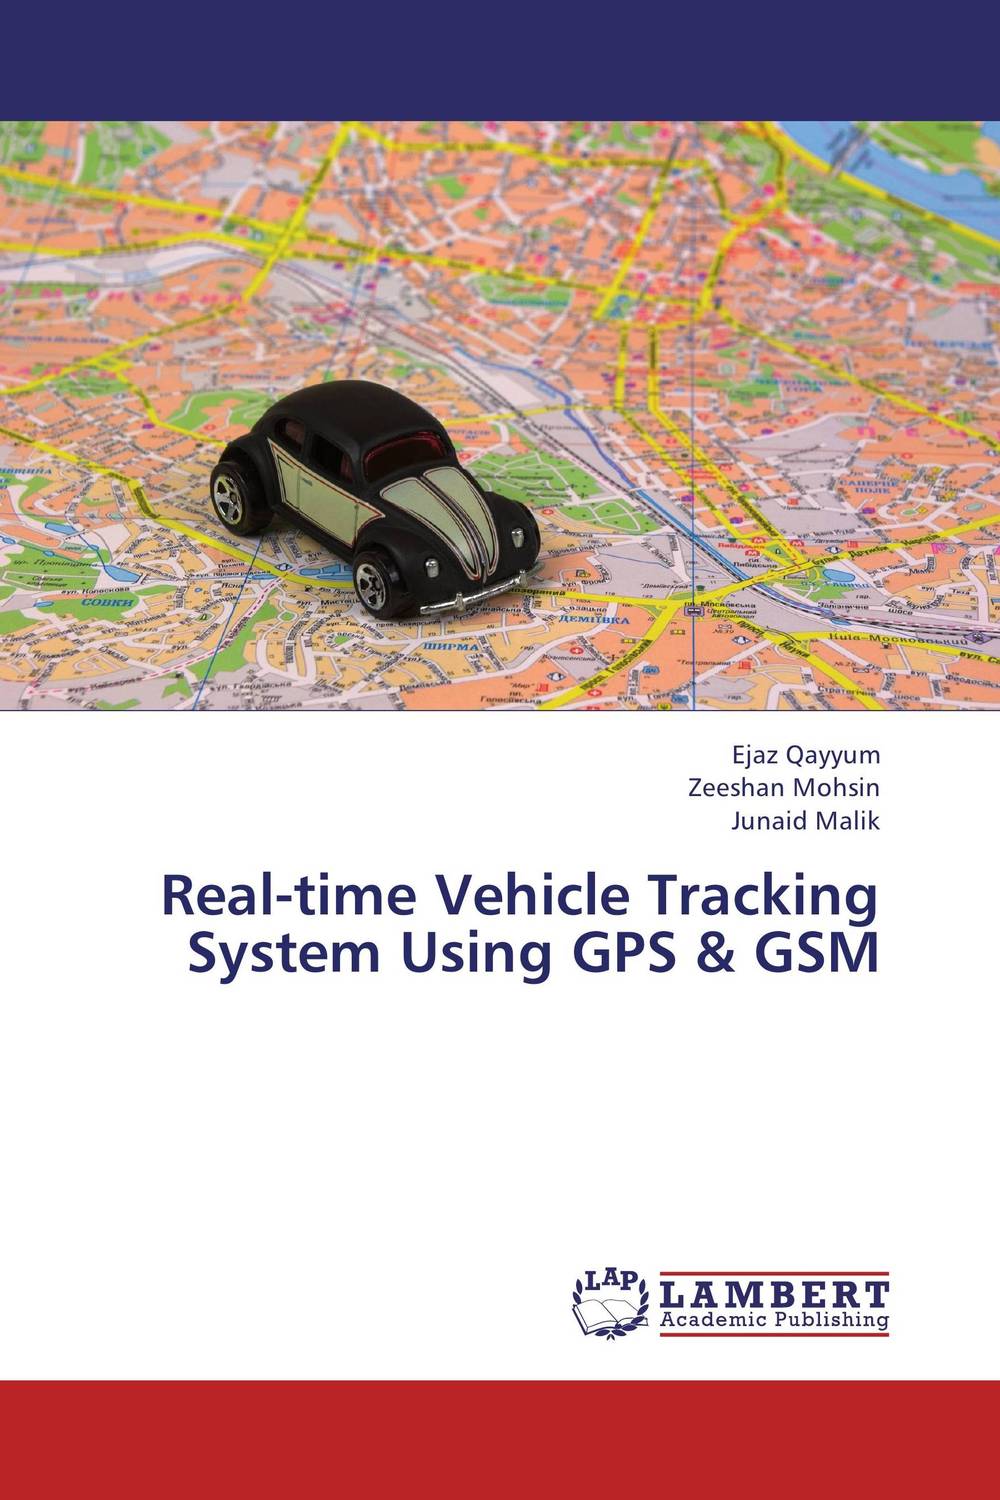 Real-time Vehicle Tracking System Using GPS & GSM